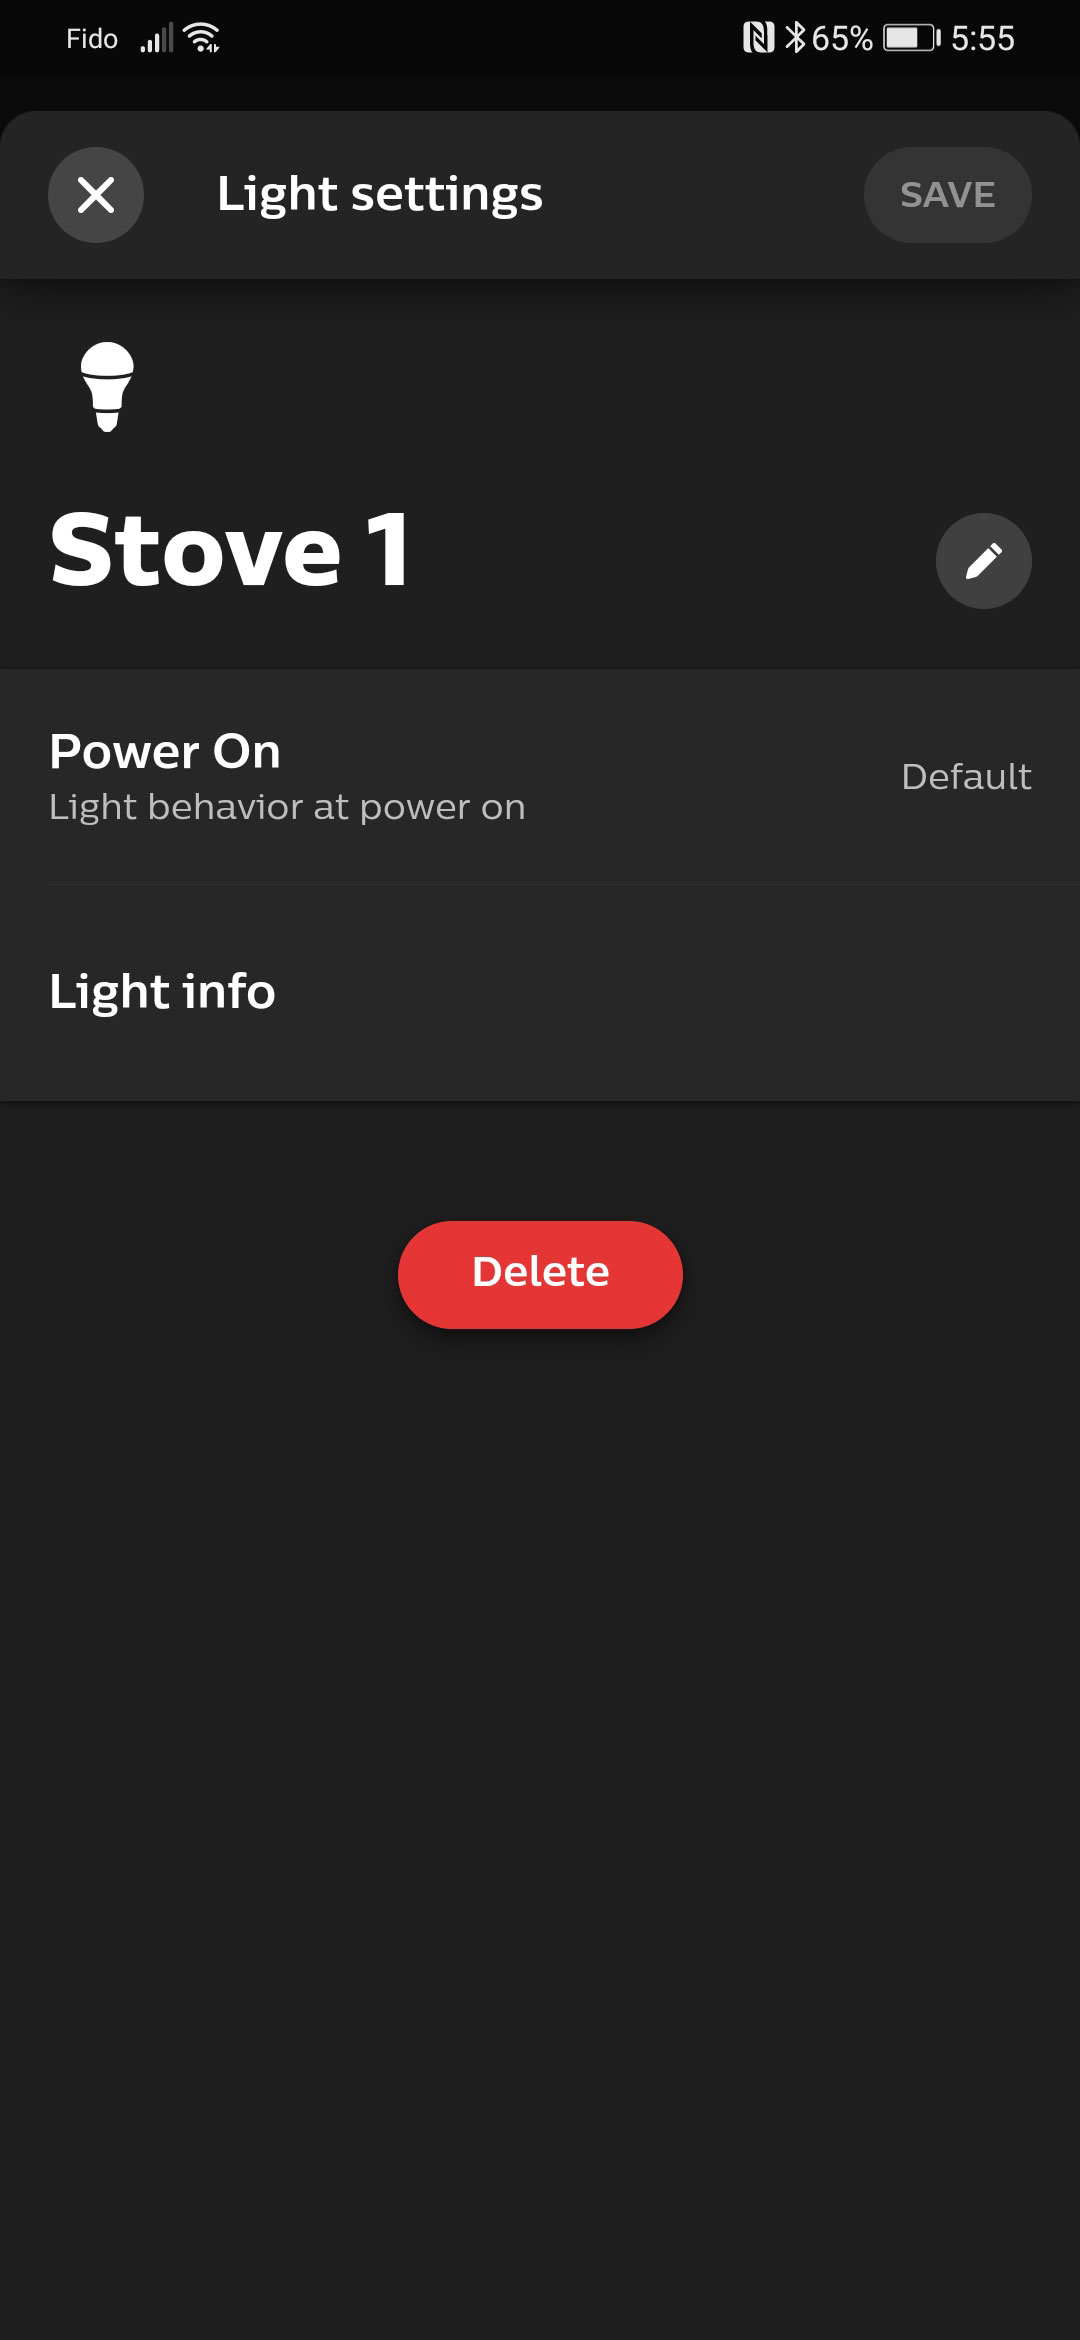 The Philips Hue Android app opens on the light settings screen.